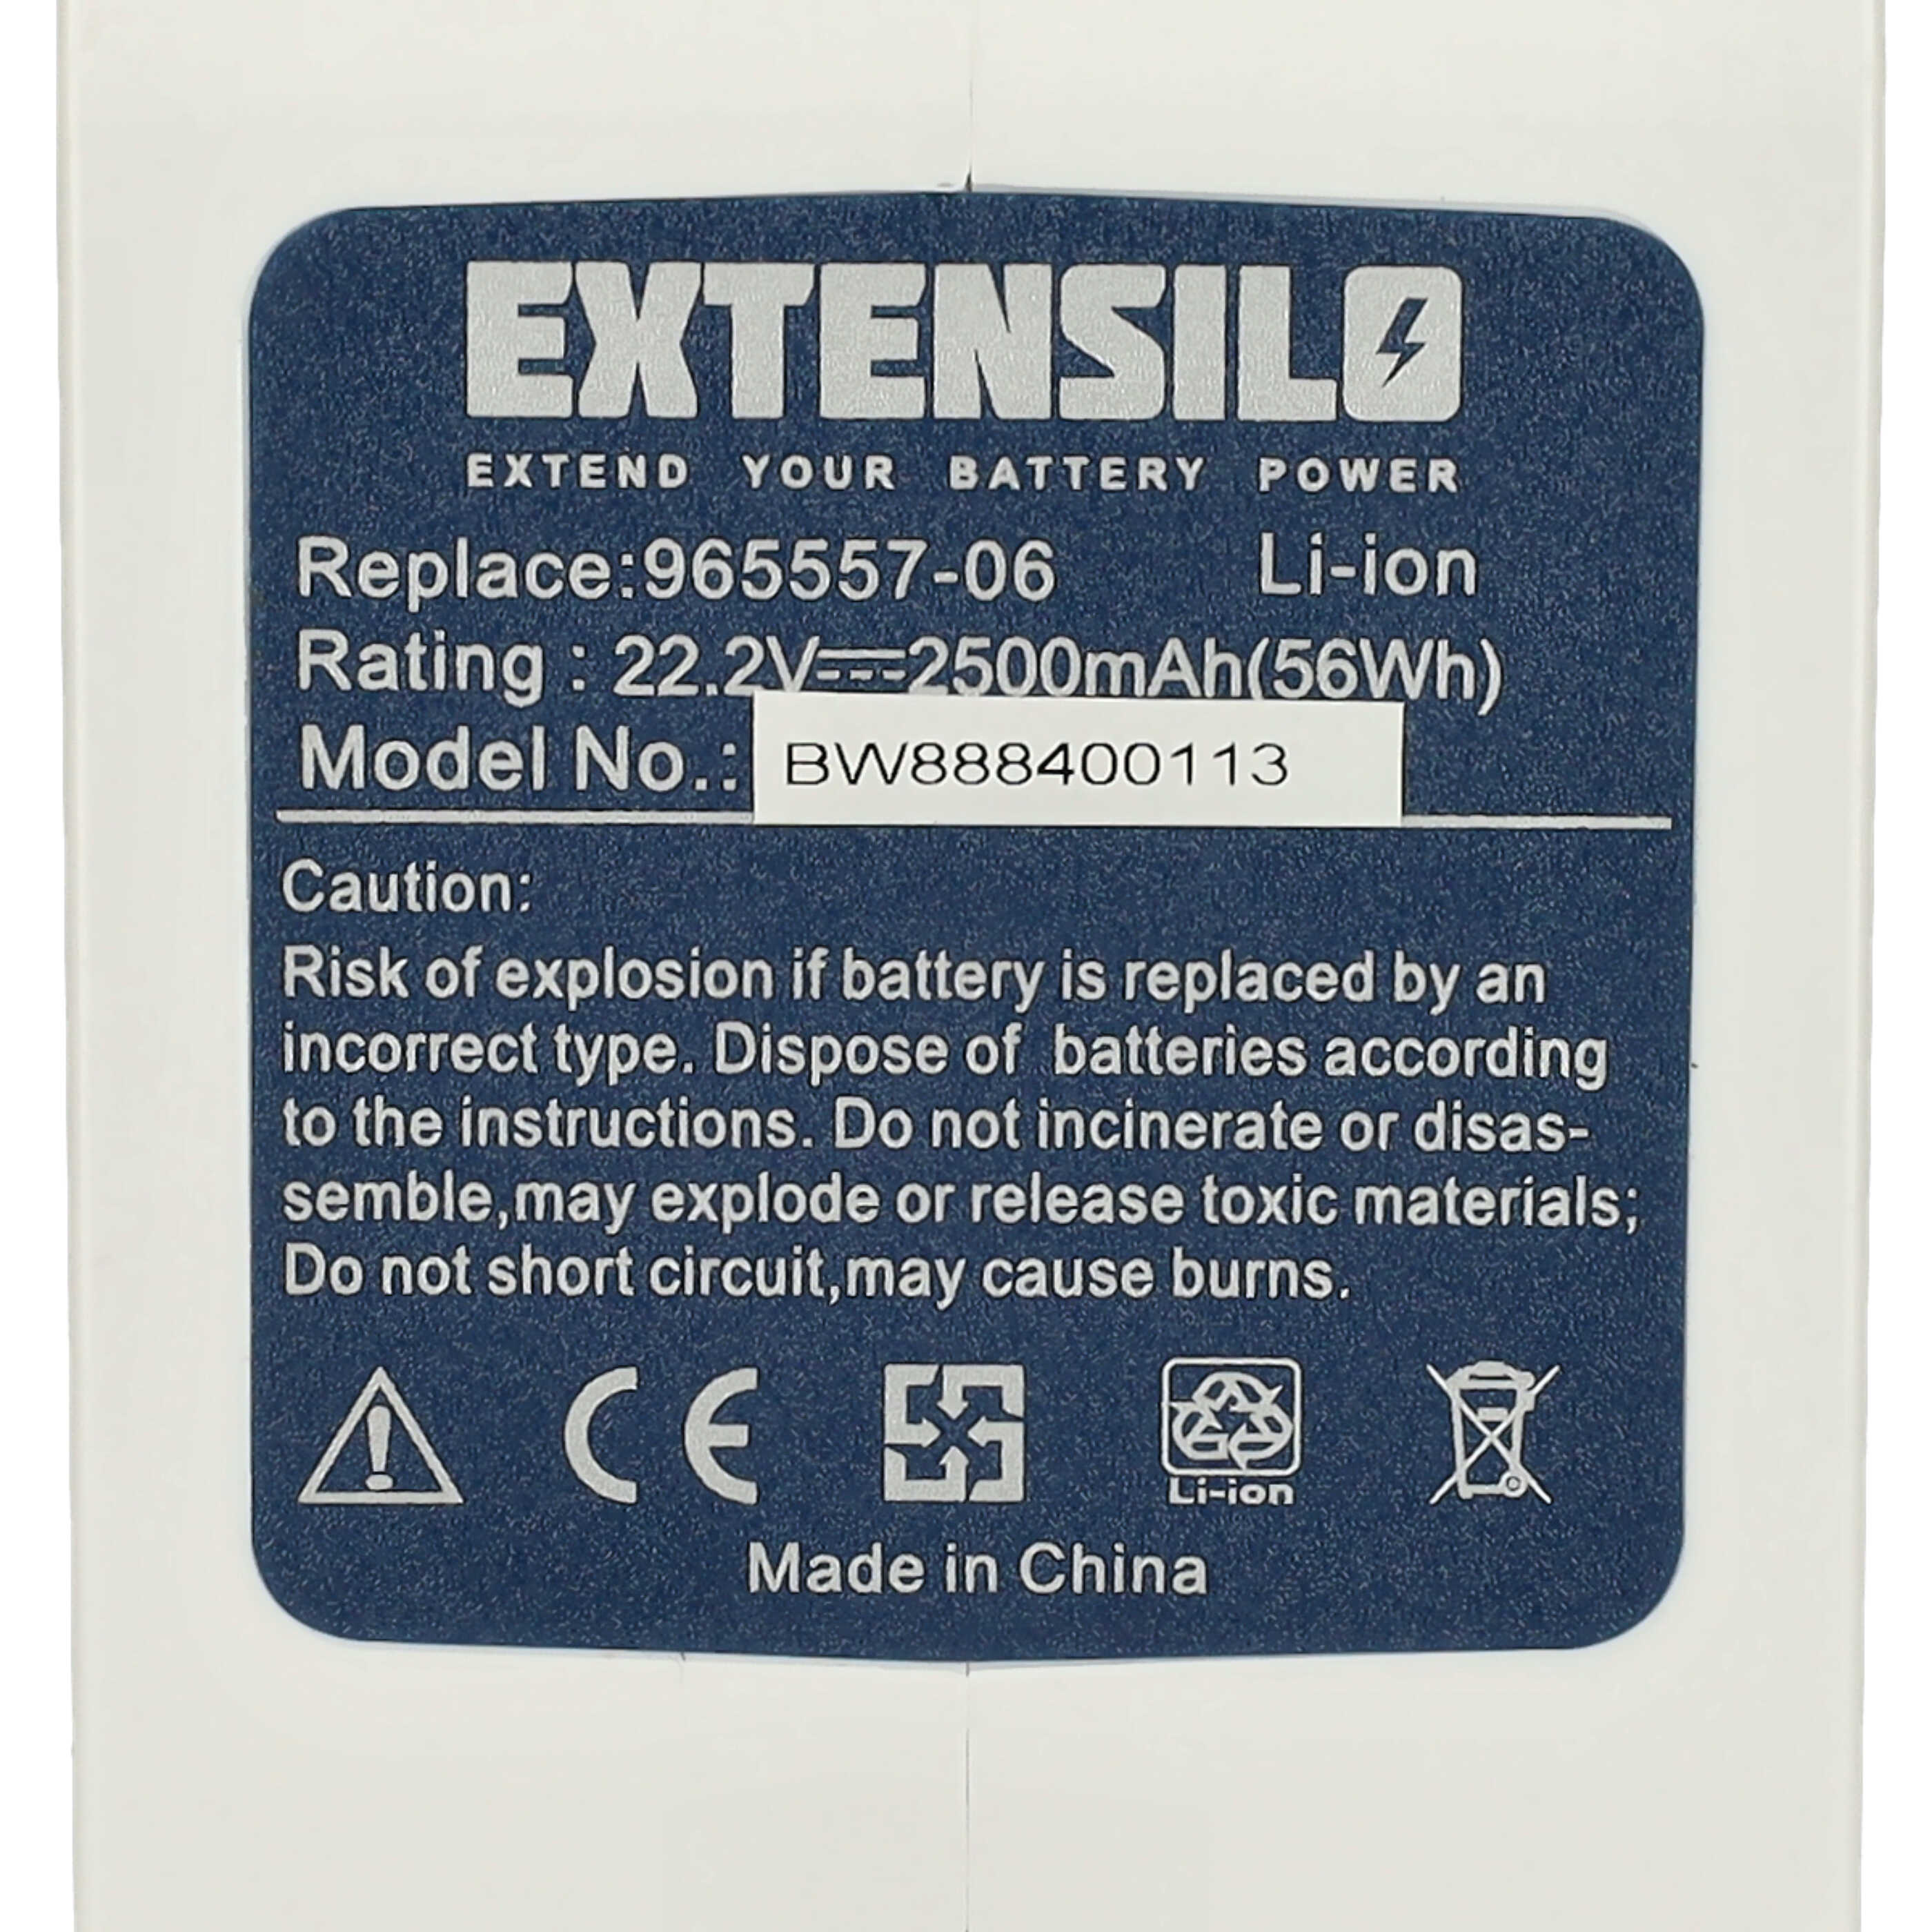 Battery Replacement for Dyson 17083-5010, 17083-3009, 17083-3511, 202932-02 for - 2500mAh, 22.2V, Li-Ion